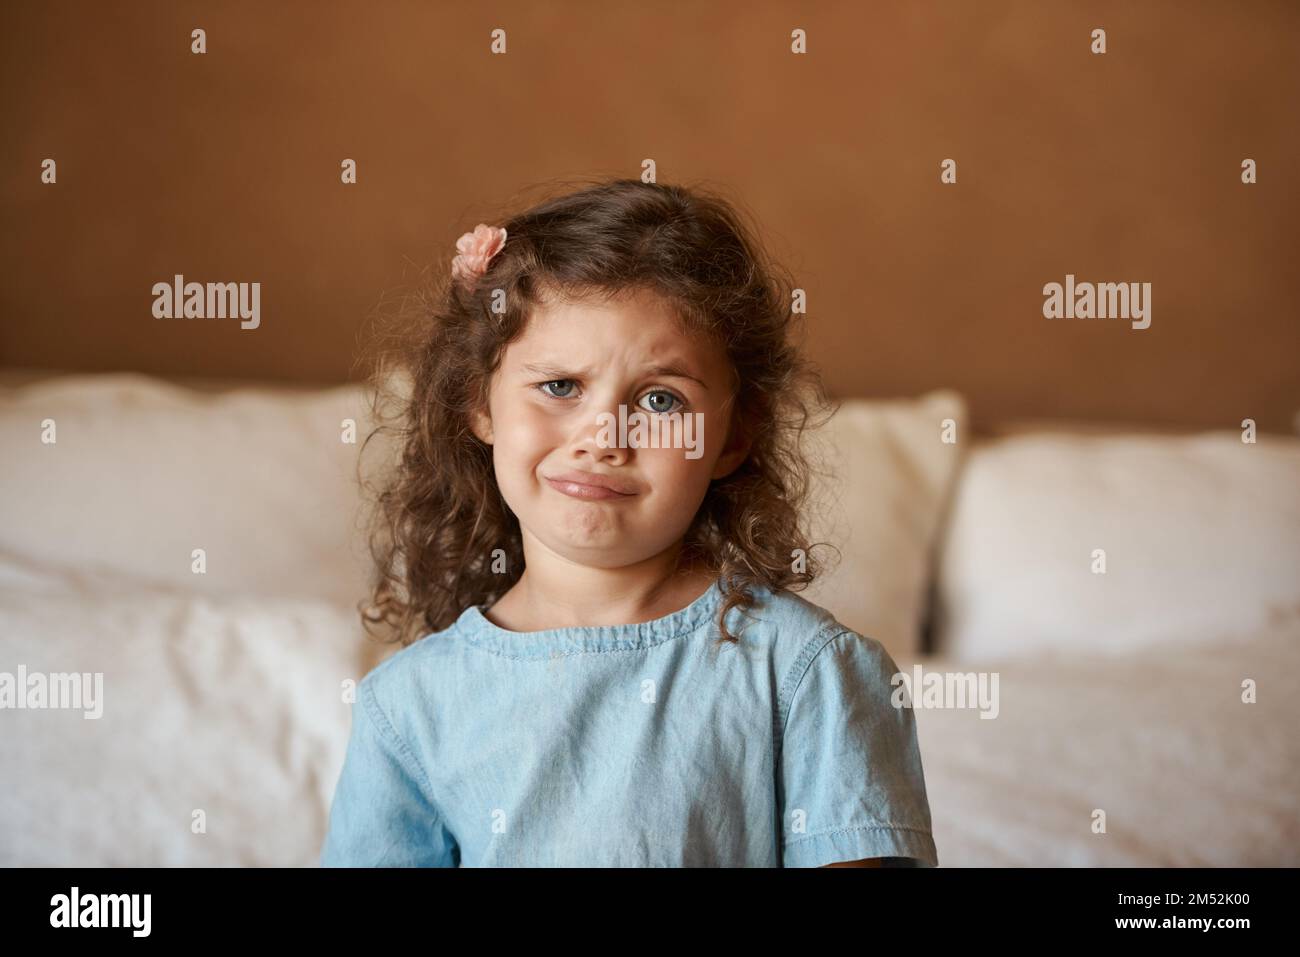 Im too old for coloring books mom. an adorable little girl at home pulling a weird but funny face. Stock Photo